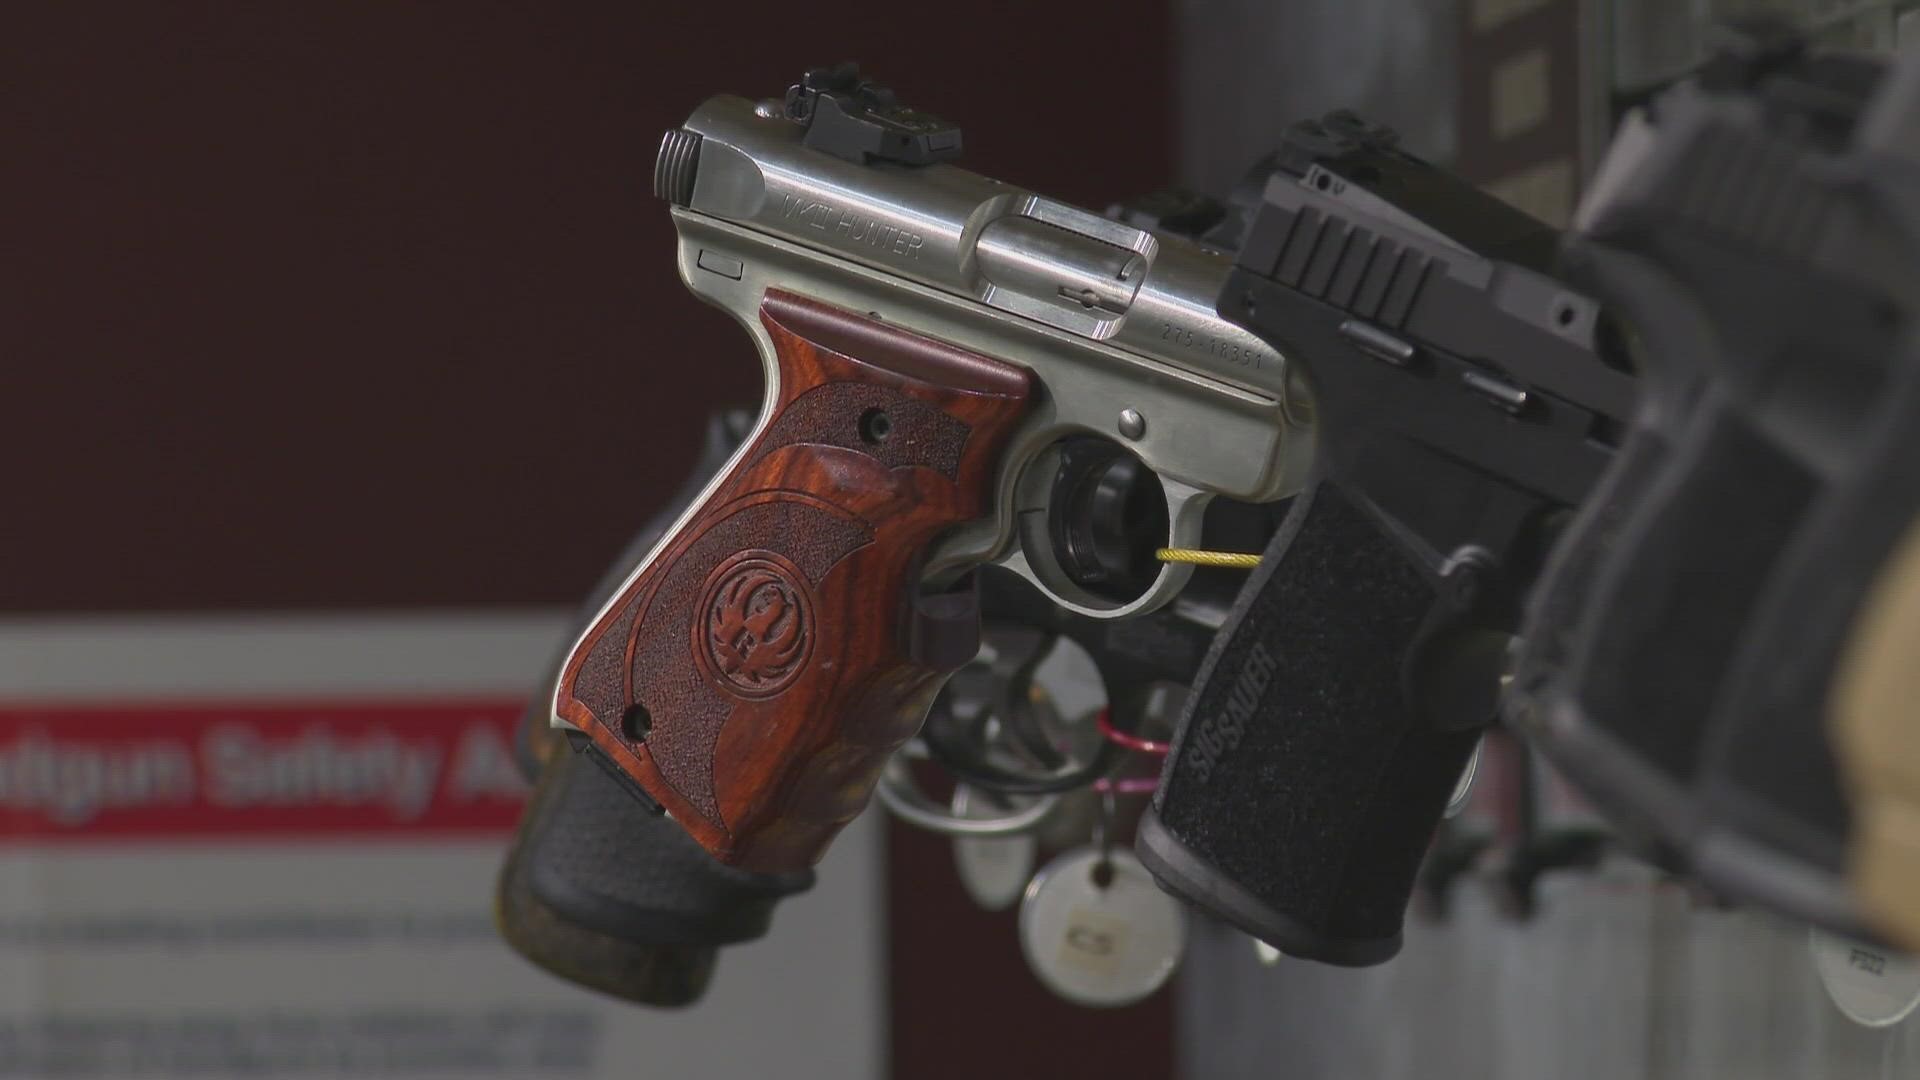 A TN lawmaker wants college students to be allowed to carry guns on campus. If the bill passes, students would undergo training and receive a permit.